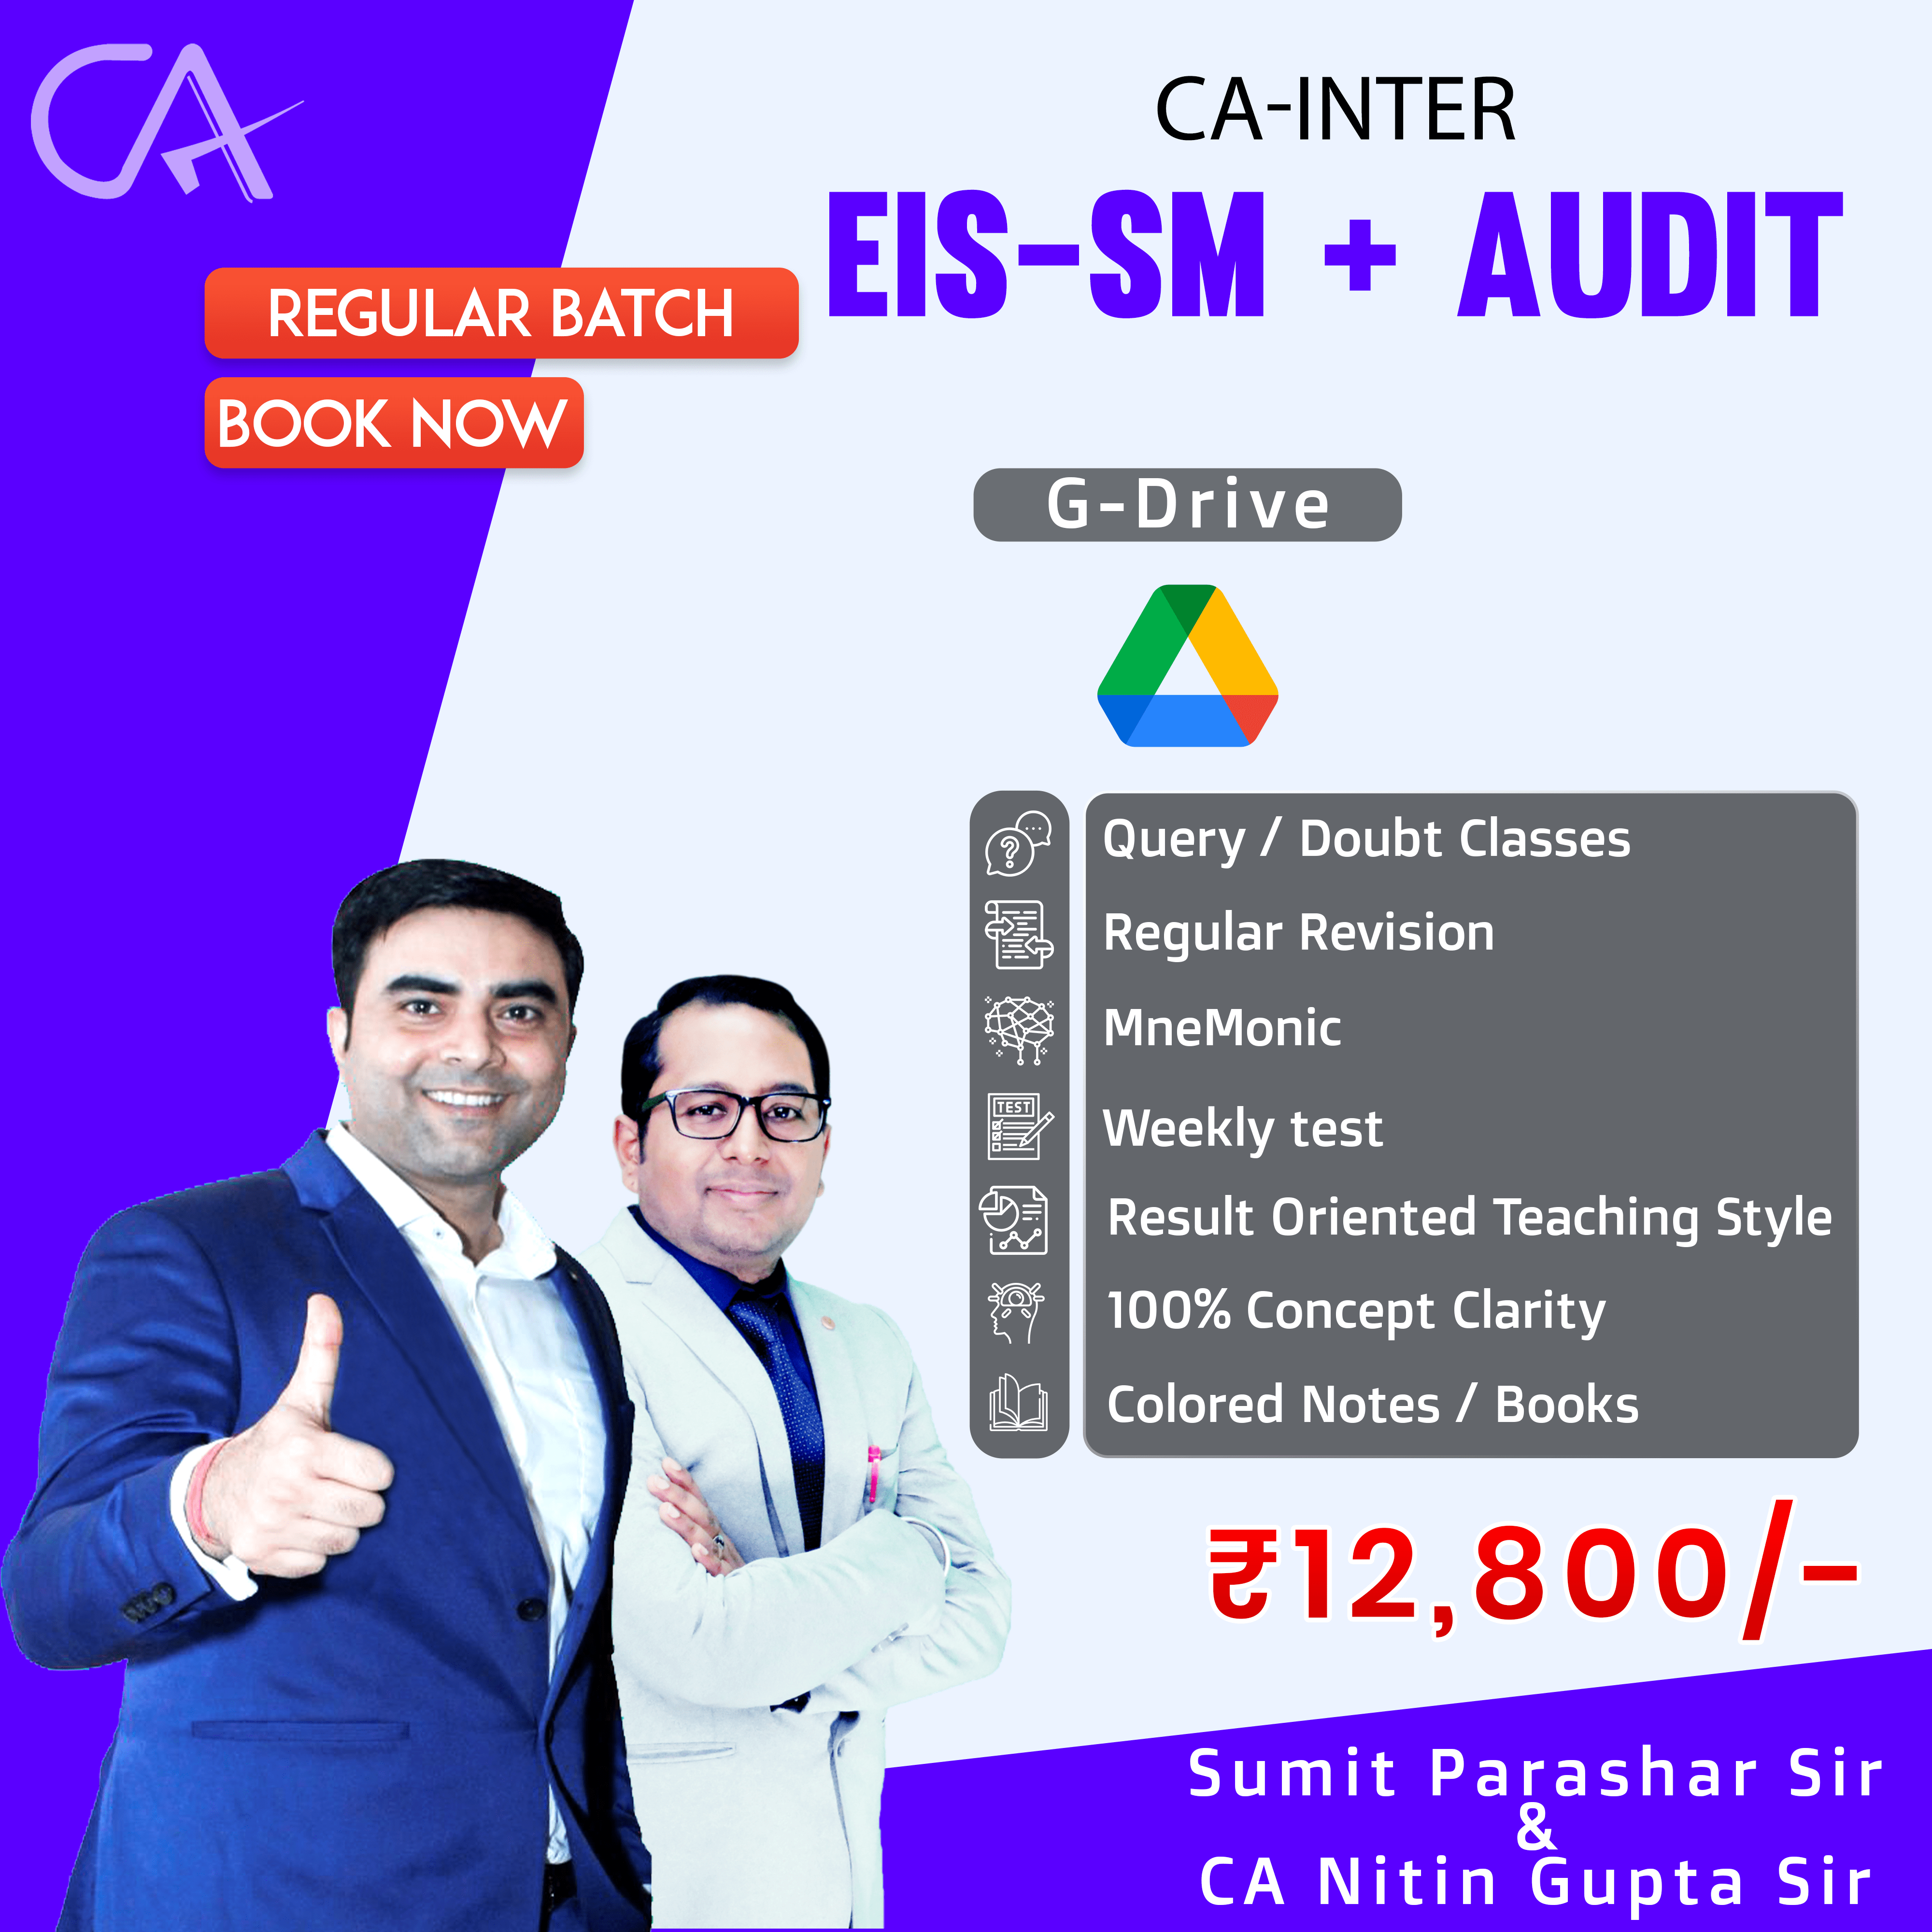 CA-Inter EIS SM and Audit & Assurance Google Drive Classes by Sumit Parashar Sir and CA Nitin Gupta Sir - Full HD Video Lecture + HQ Sound